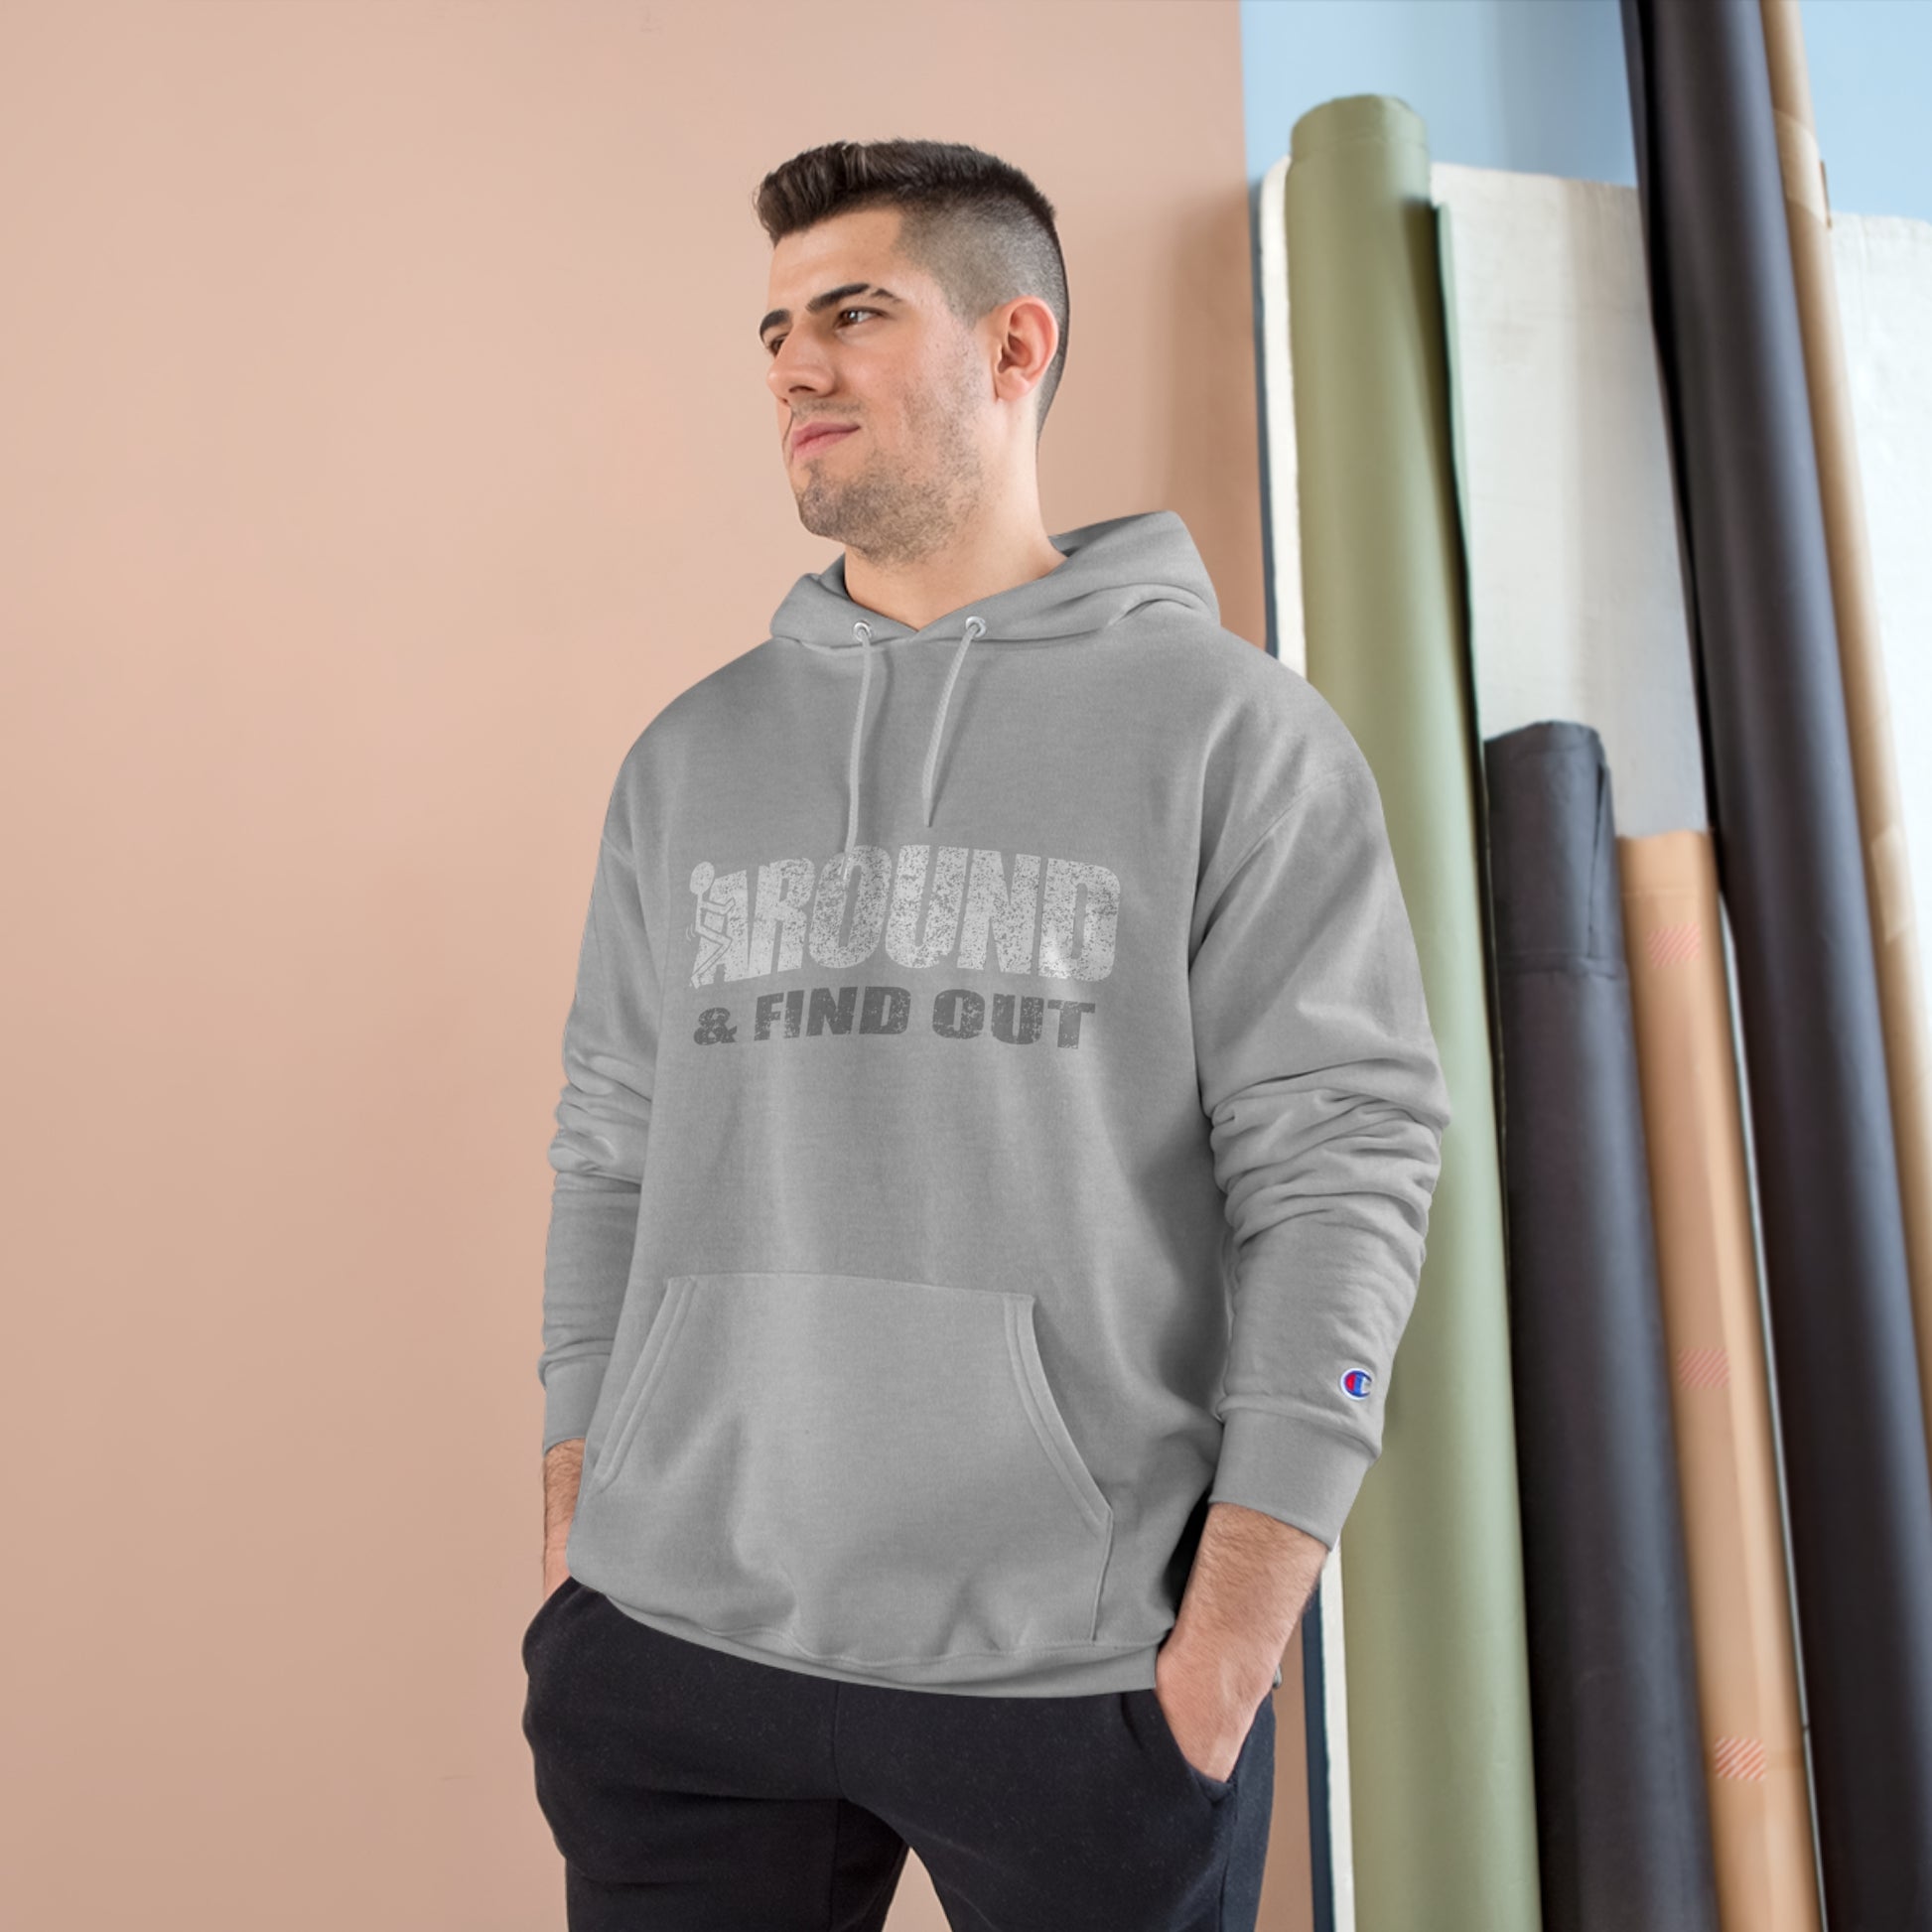 F#*k around and find out Champion Hoodie